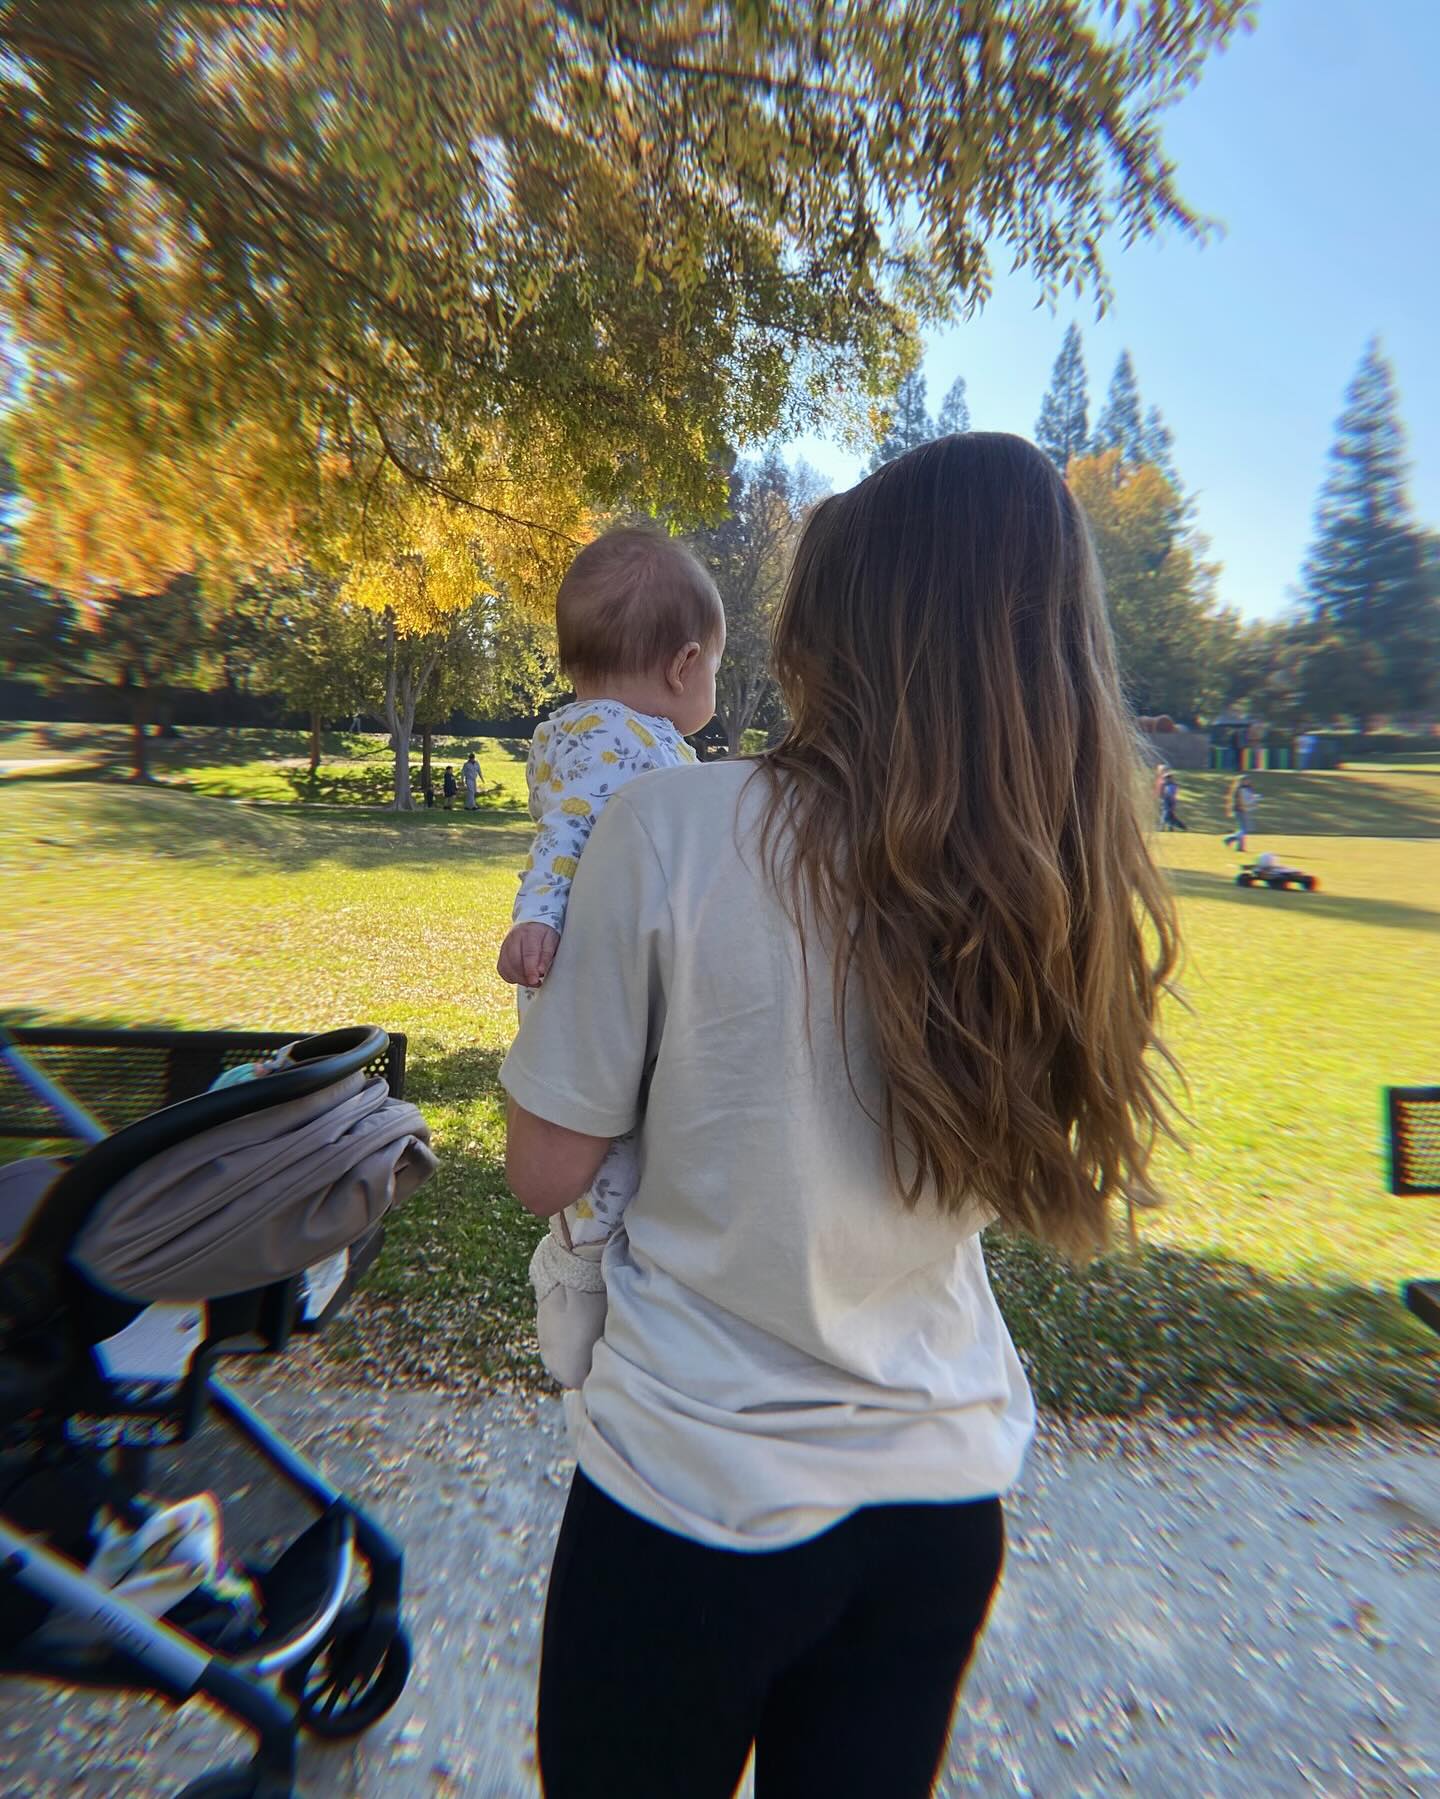 Saturday walks with my little fam are my favorite 🤍✨
.
.
@the_ilolas shirt by @alleyandrae 💕